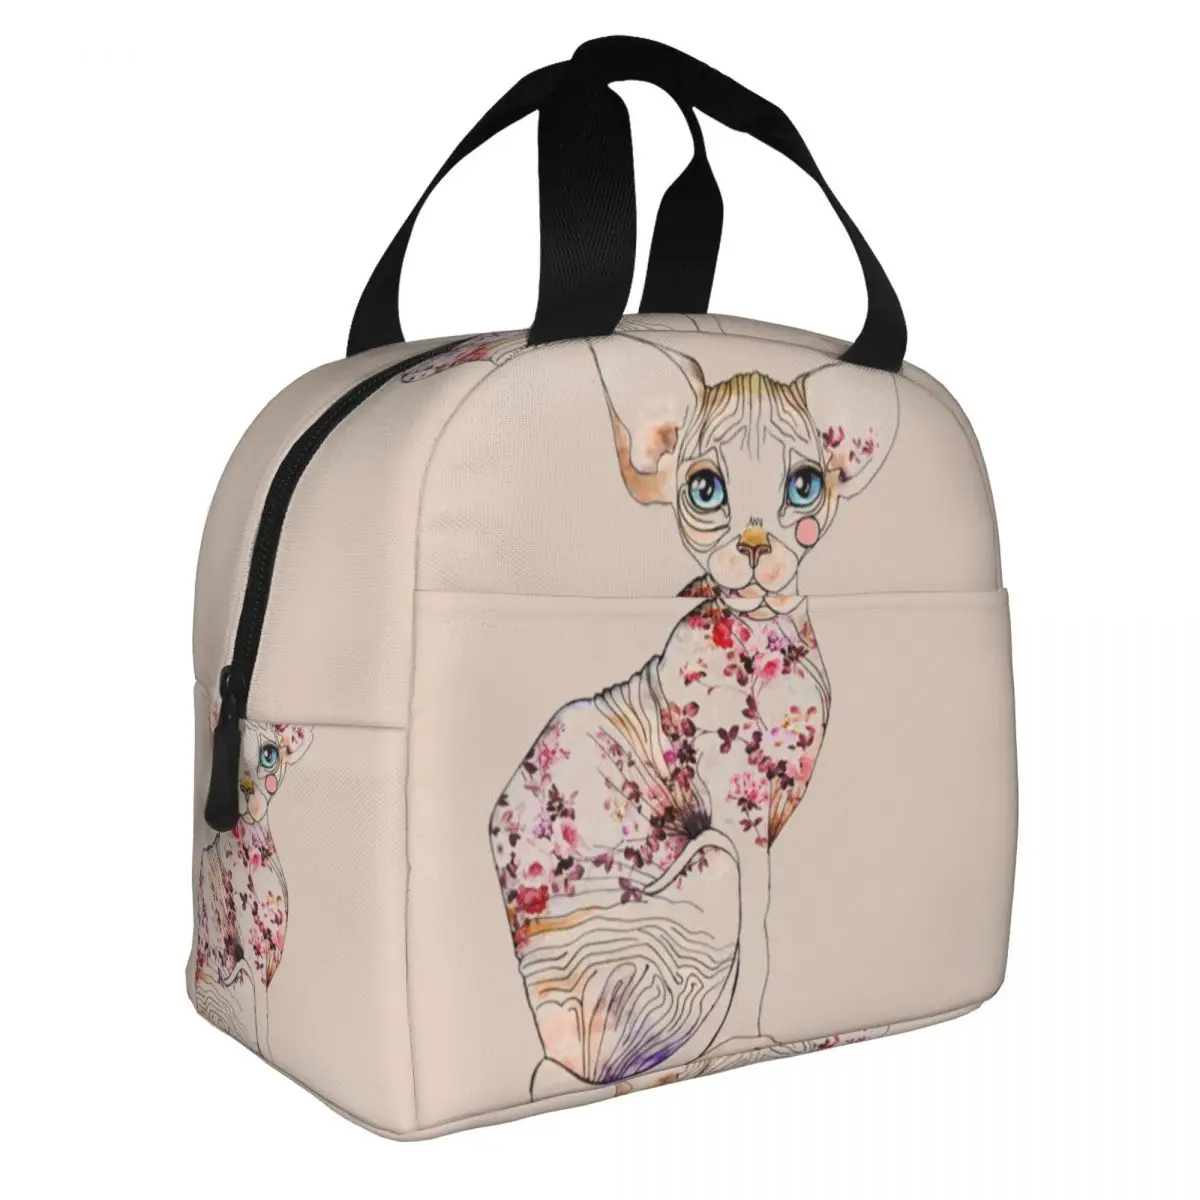 Sphynx Cat Lunch Bento Bags Portable Aluminum Foil thickened Thermal Cloth Lunch Bag for Women Men Boy